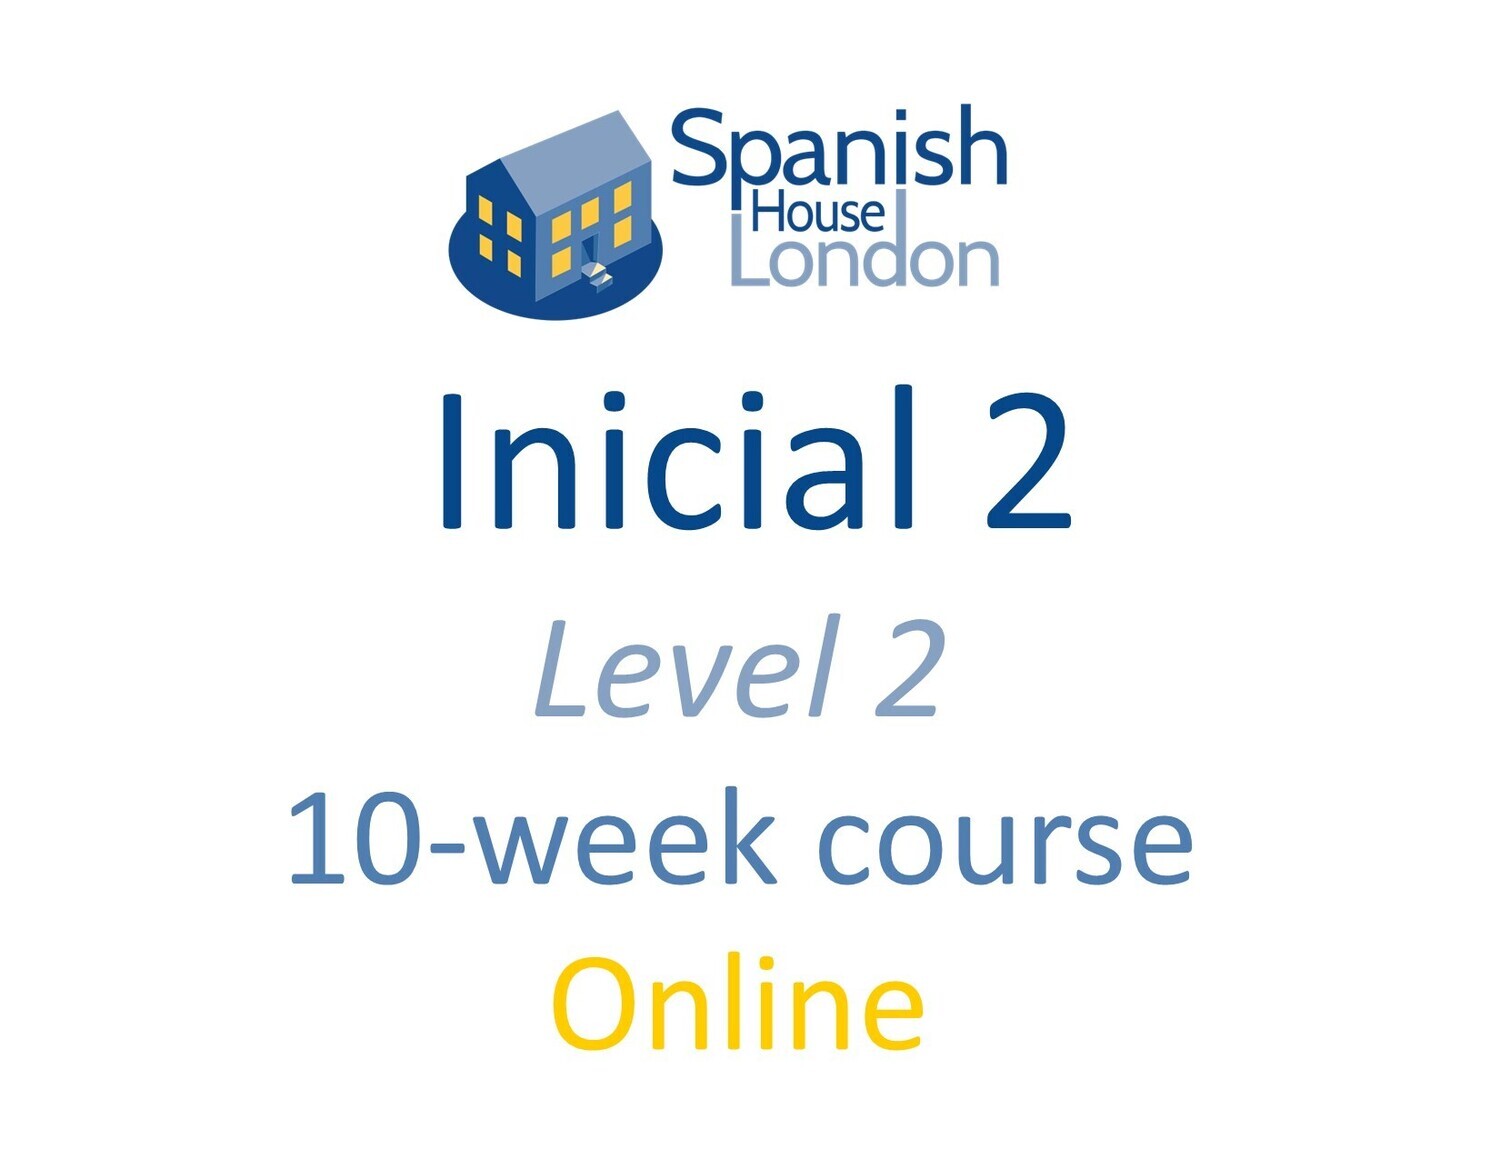 Inicial 2 Course starting on 12th April at 7.30pm Online